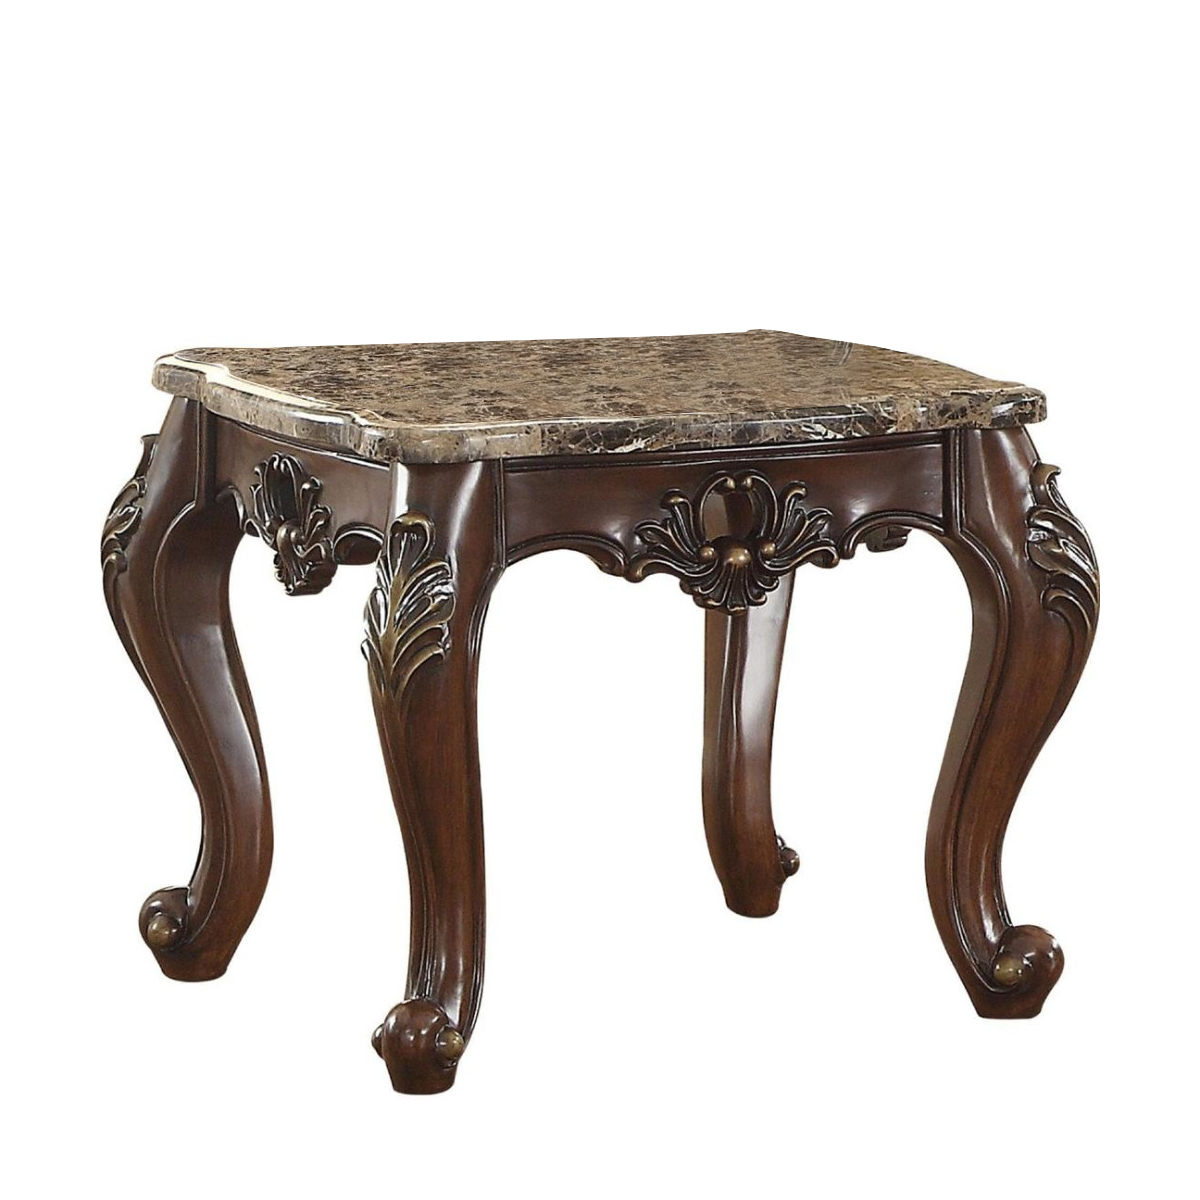 Marble Top End Table With Carved Floral Motifs Wooden Feet, Brown- Saltoro Sherpi